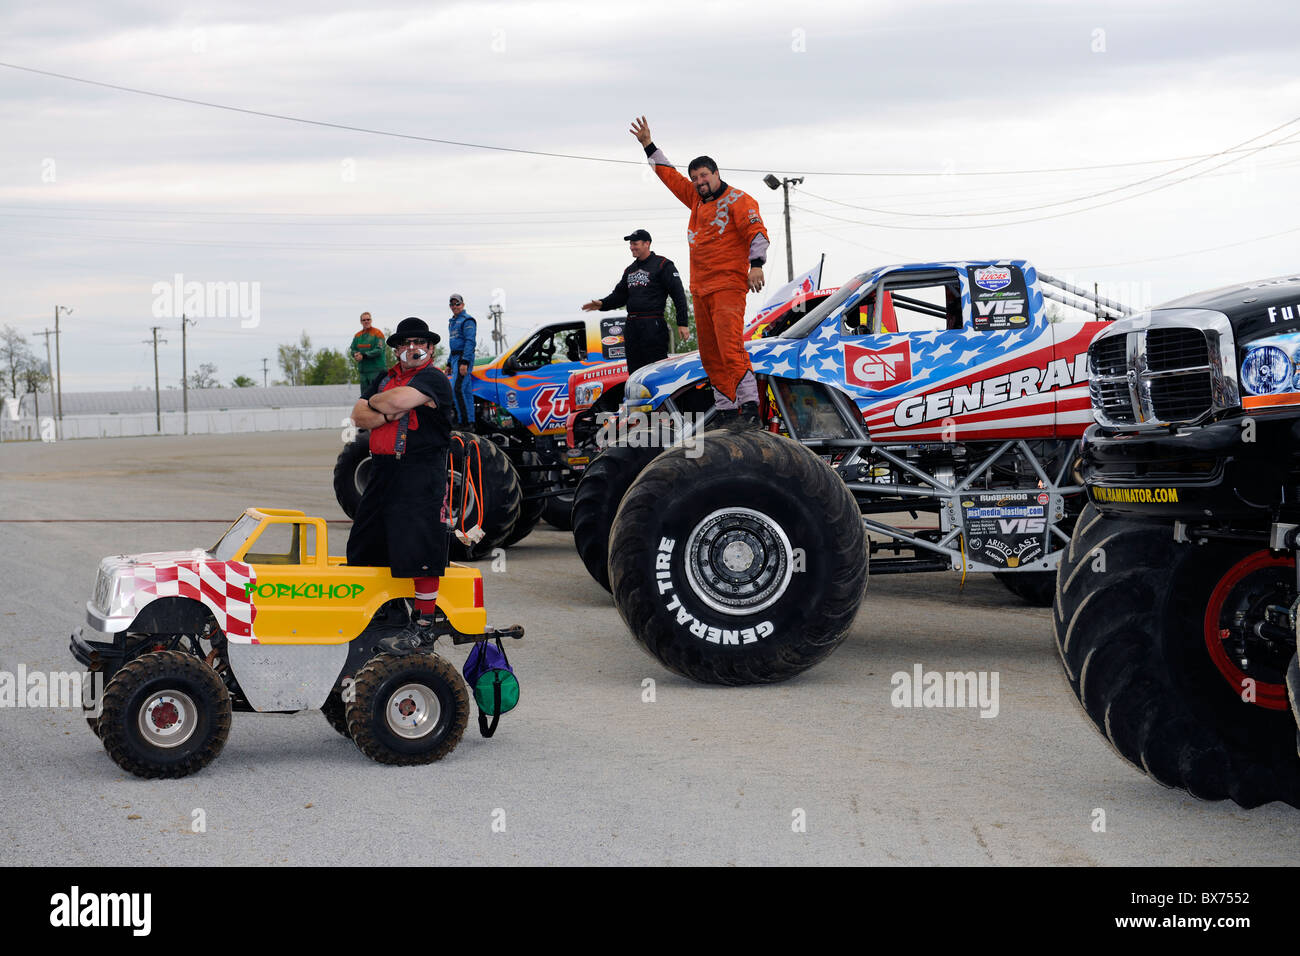 Monster Truck drivers wave to crowd at freestyle competition at 4x4 Off-Road Jamboree Monster Truck Show at Lima, Ohio. Stock Photo